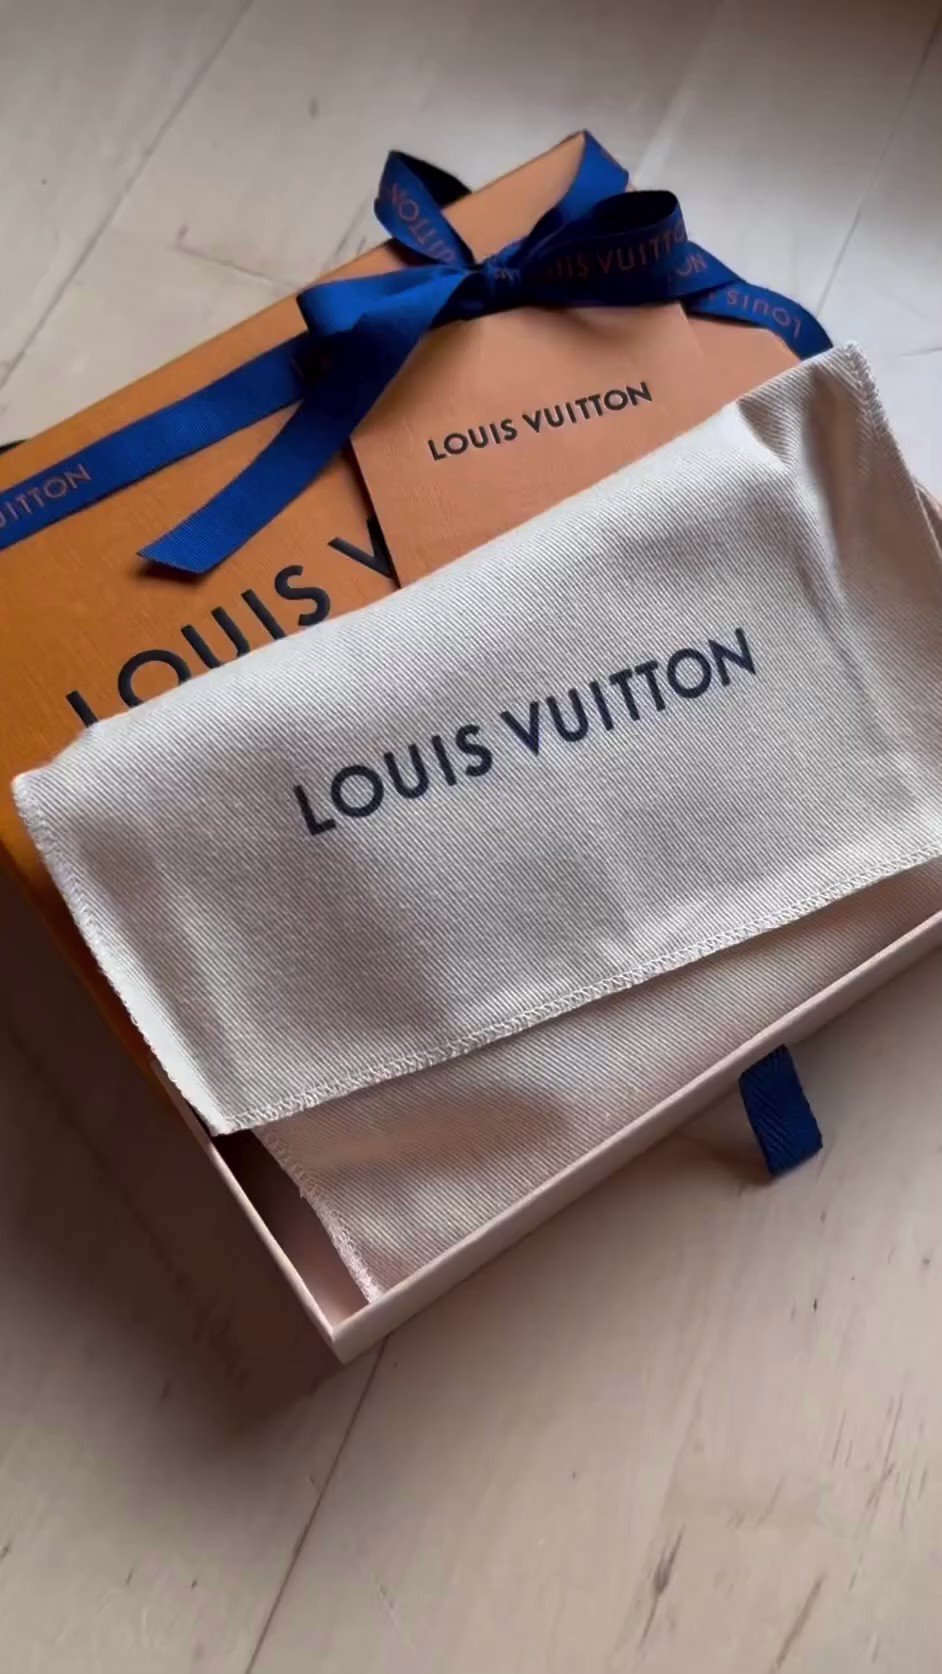 Louis Vuitton Gift Wrapping Supplies